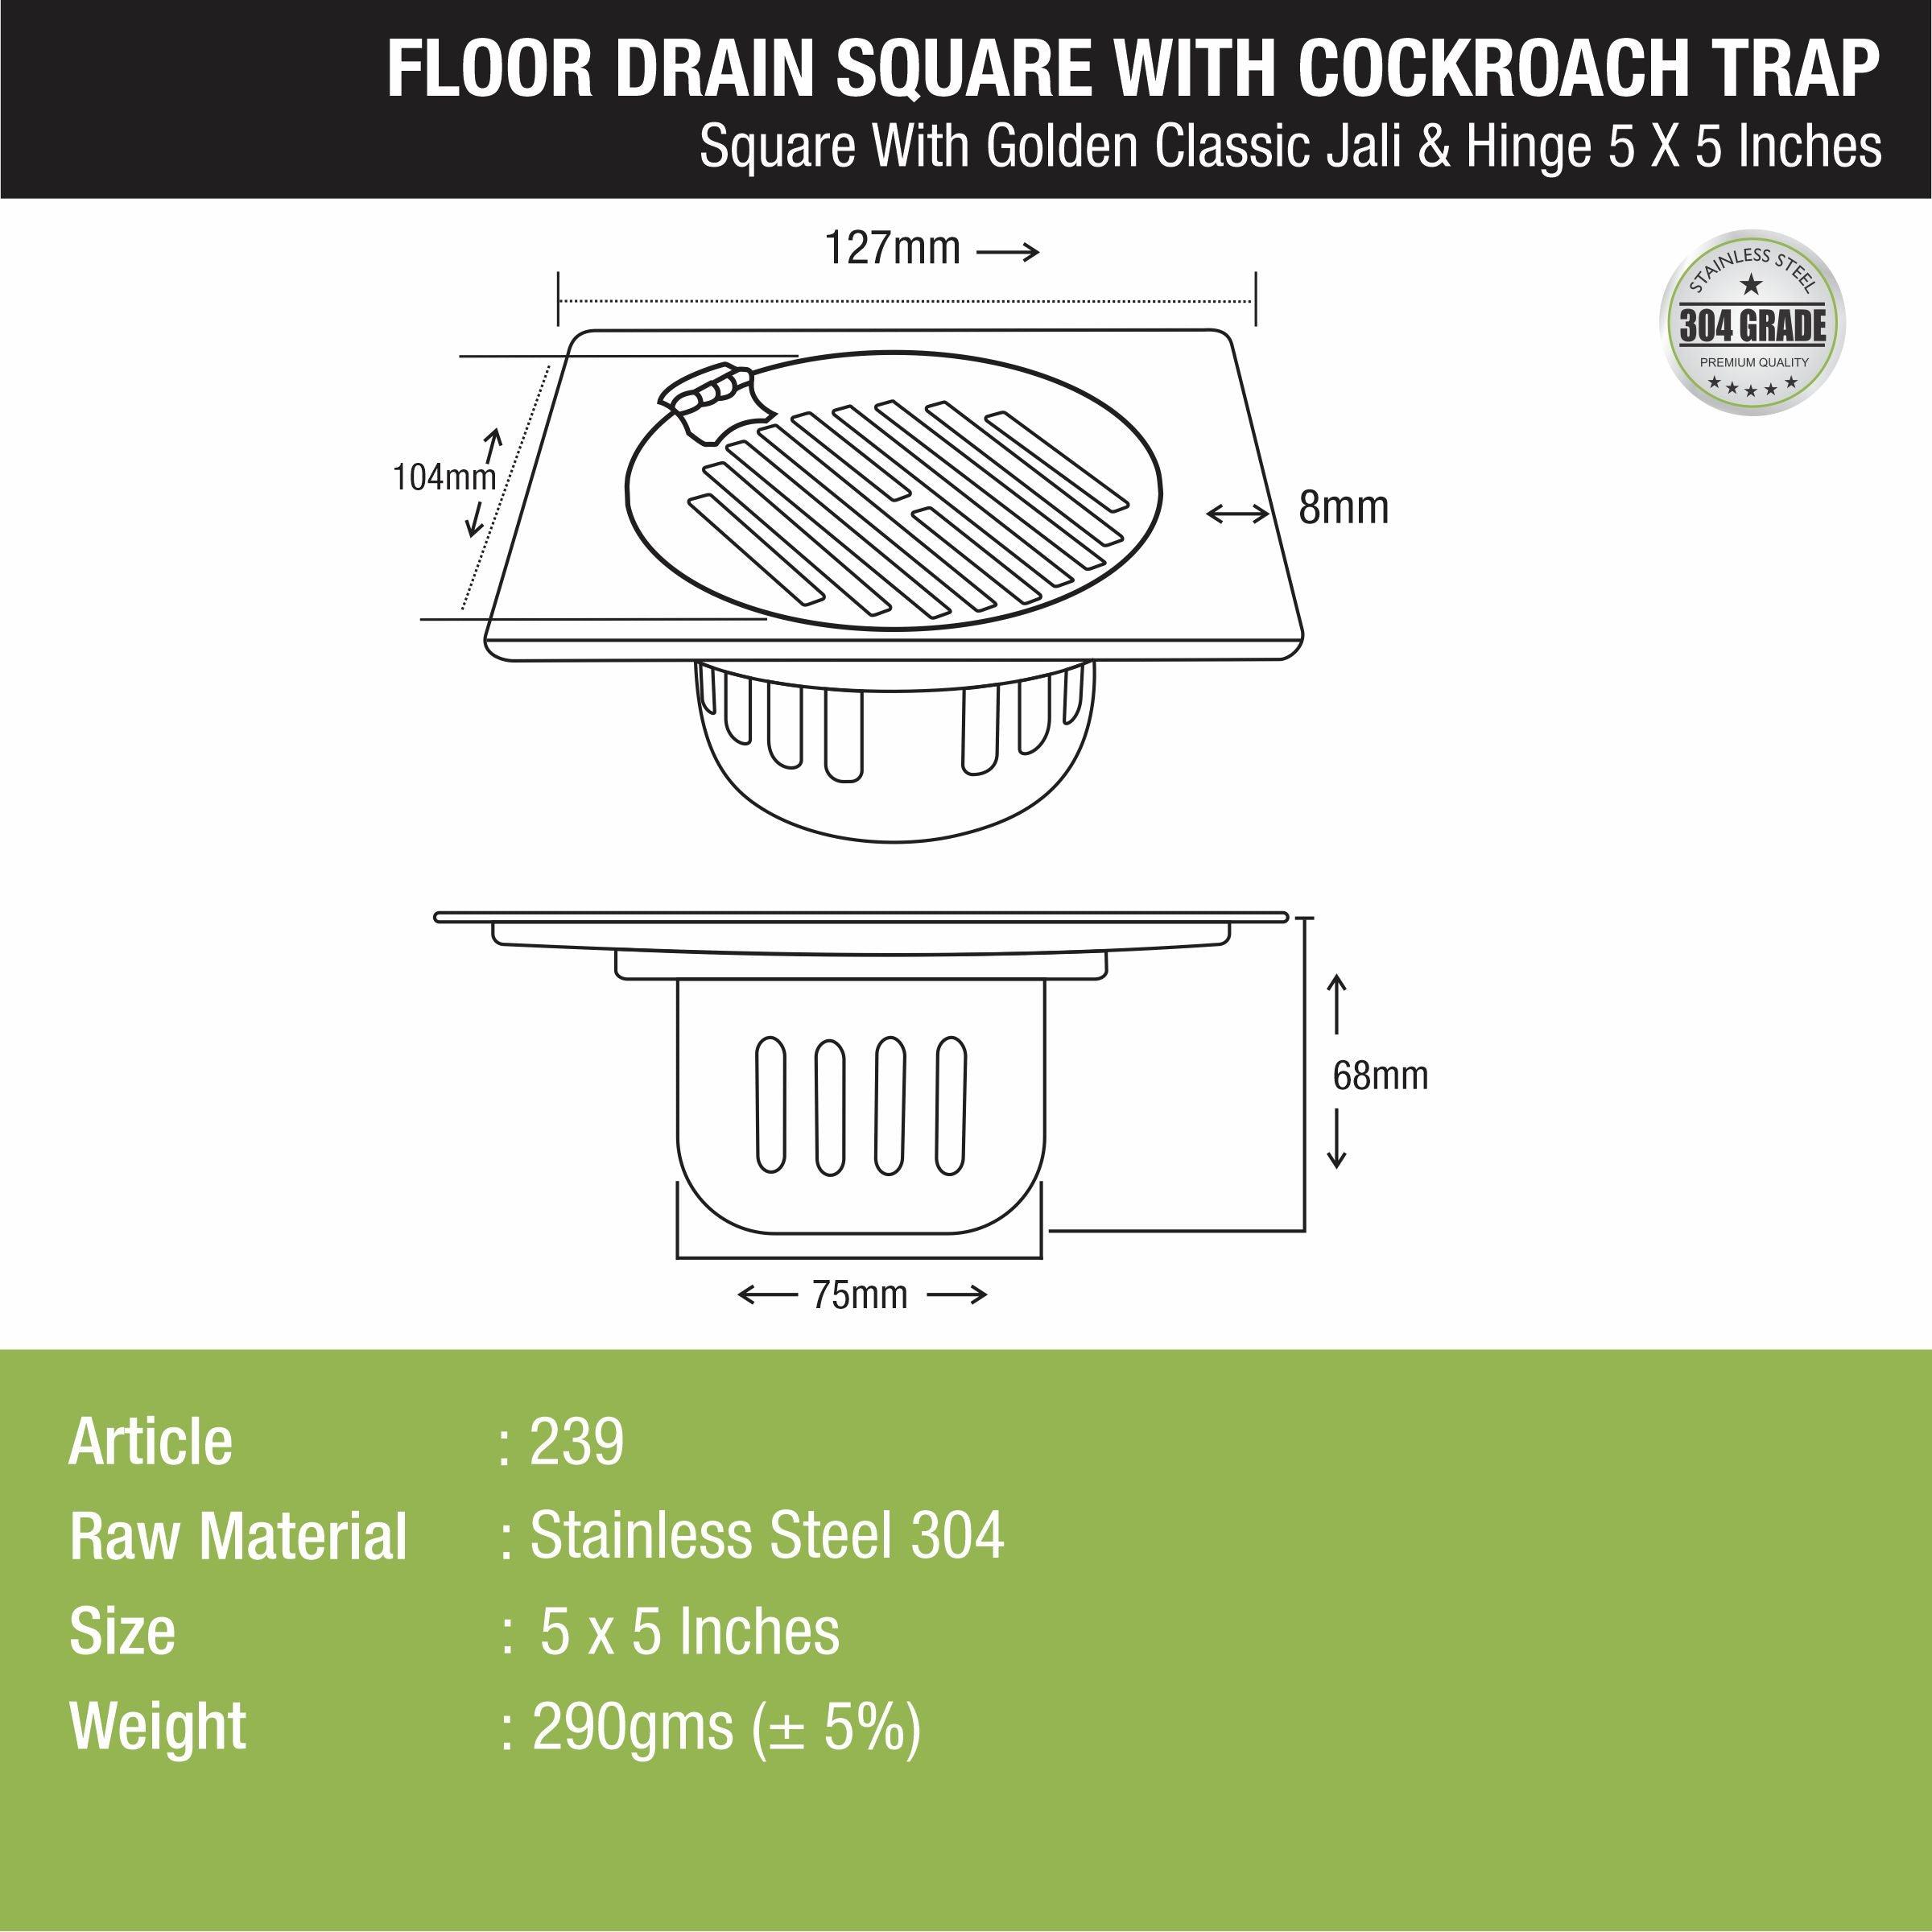 Golden Classic Jali Square Floor Drain (5 x 5 Inches) with Hinge and Cockroach Trap - LIPKA - Lipka Home